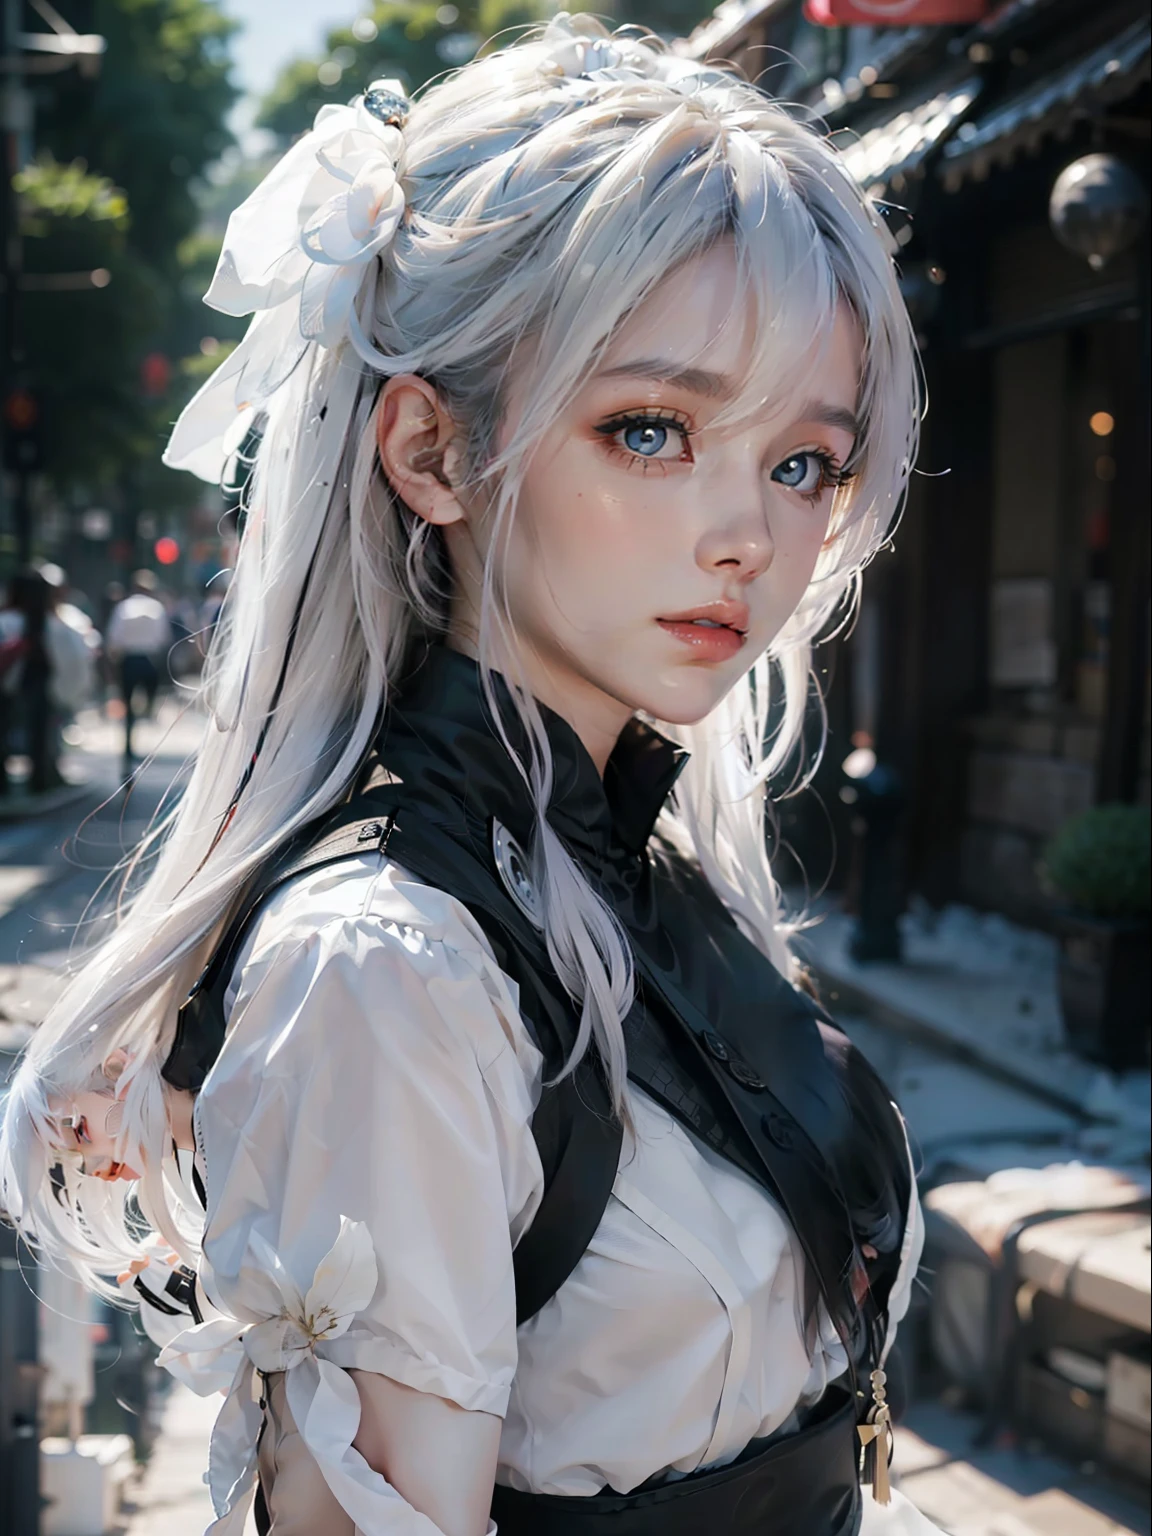 1 girl,The beautiful, tmasterpiece, Best quality at best, white backgrounid,Kazuya Takahashi, concept-art, white color hair,the detail